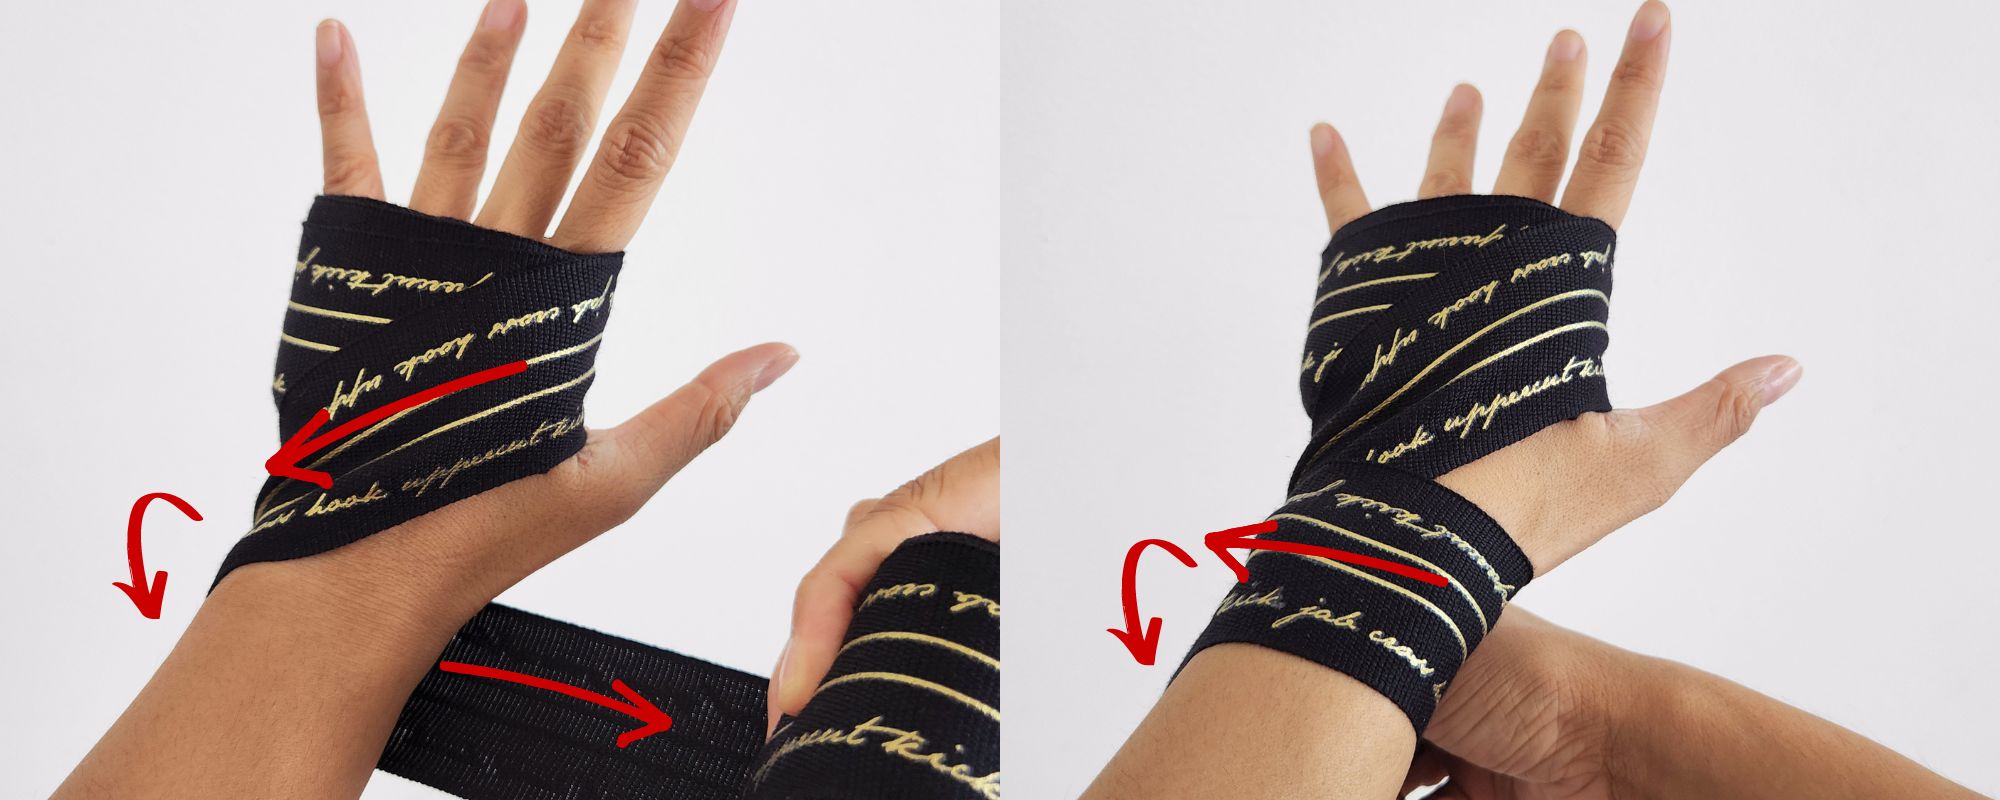 tutorial how to wrap handwraps for boxing muay thai kickboxing